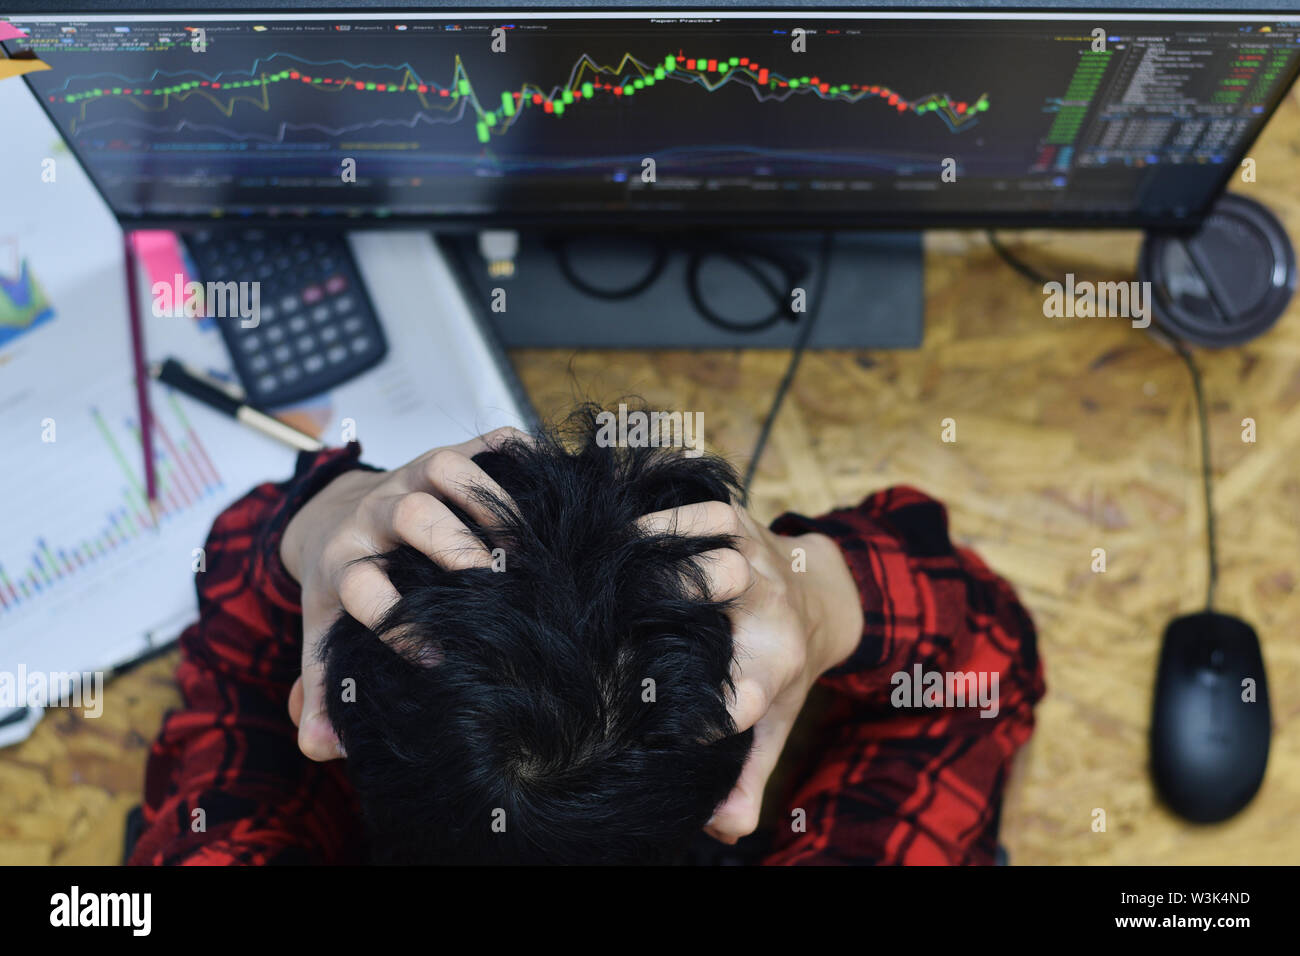 Fatigue man hands holding the head because of stress and having a headache at home office in while trading forex or stocks market online investment at Stock Photo